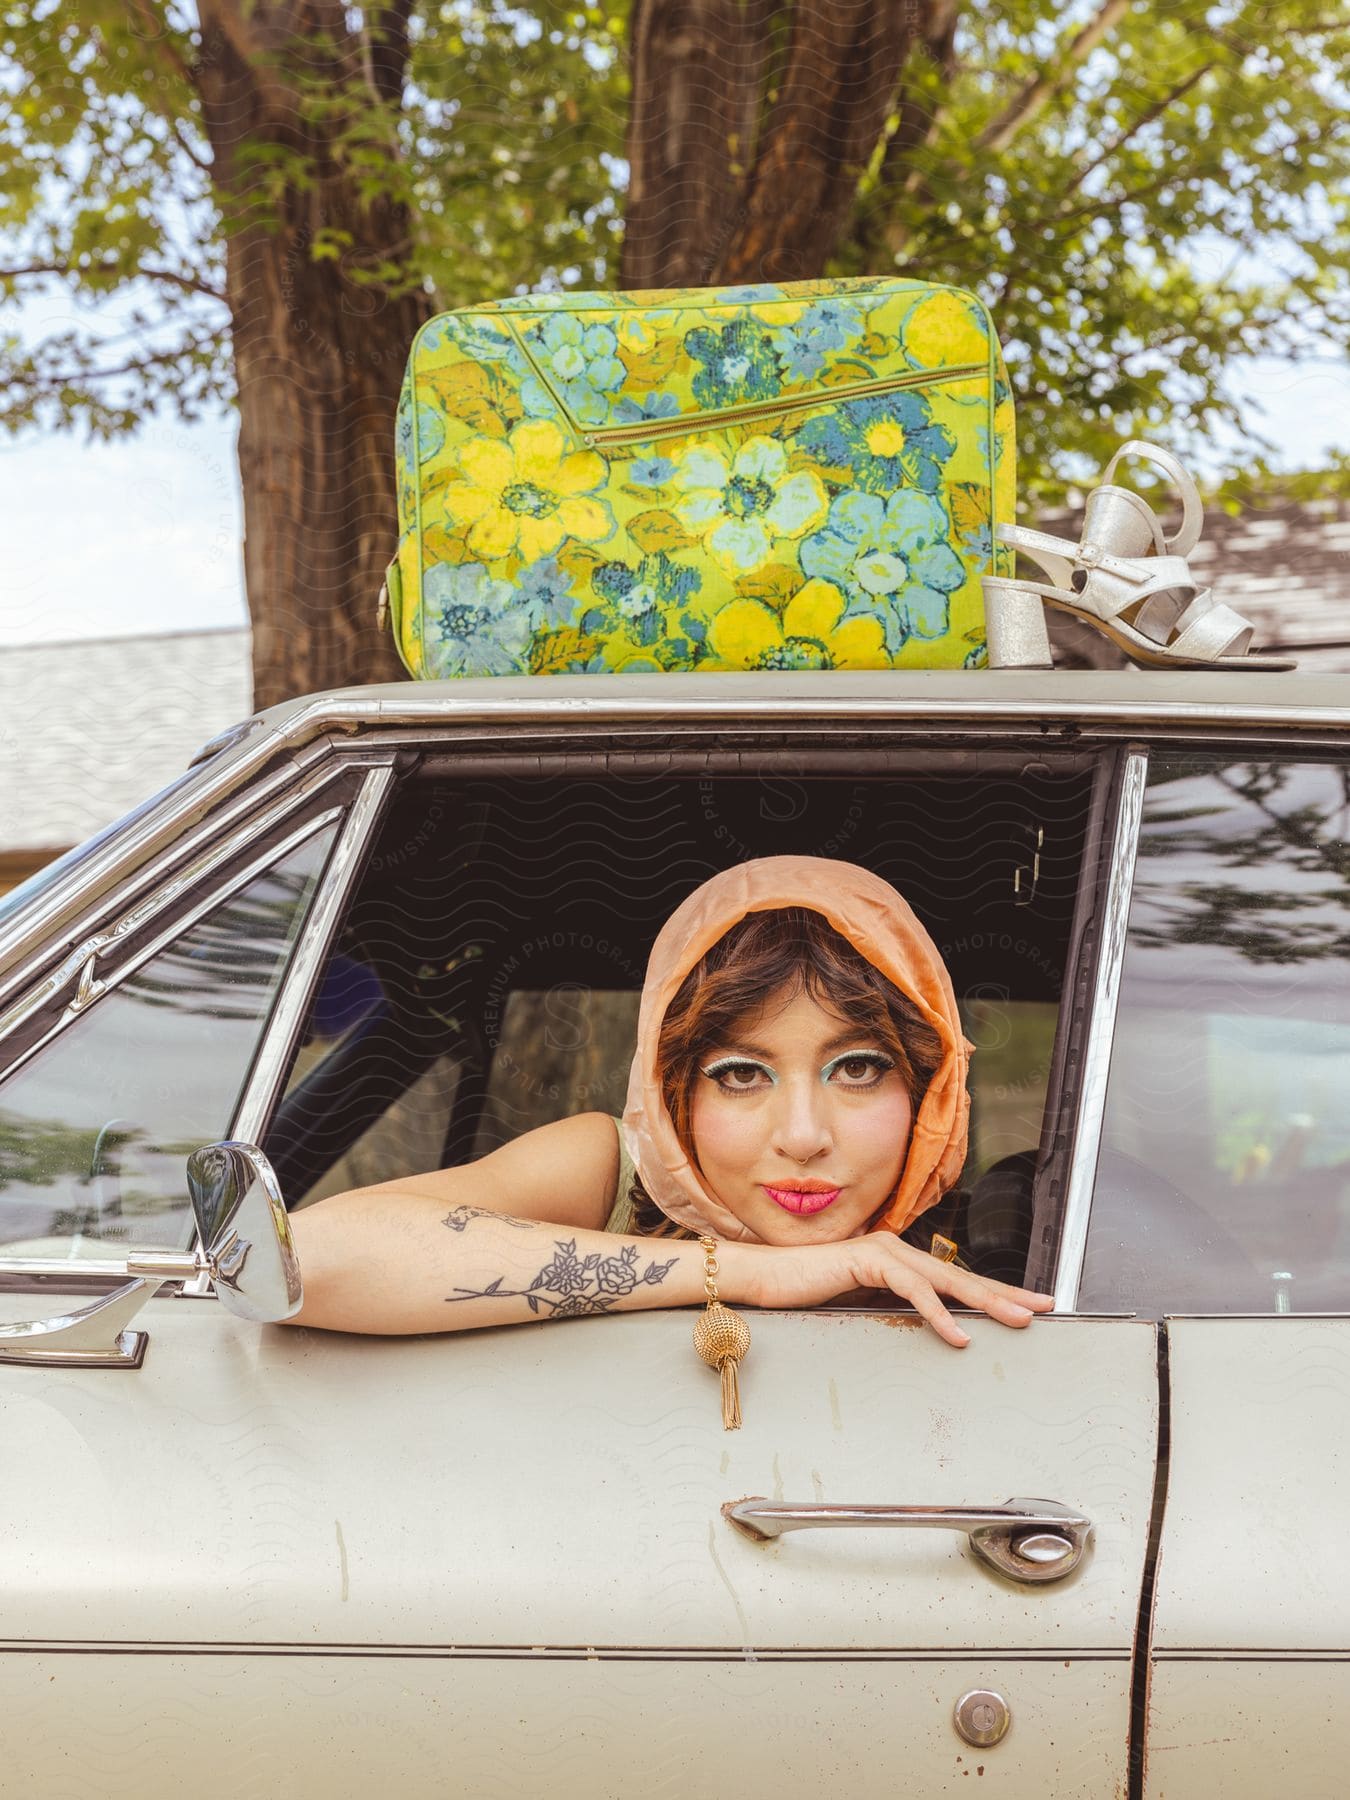 A person sitting in an old car with a floral suitcase on the roof.